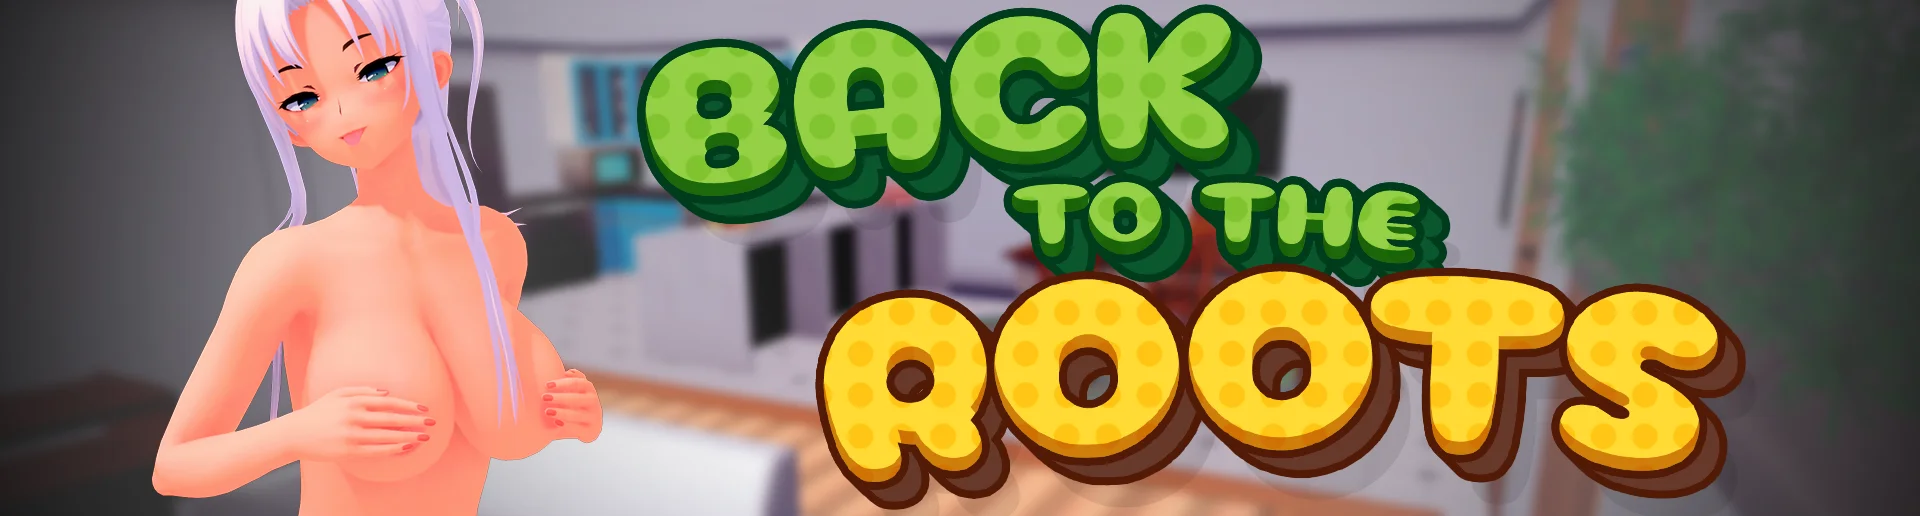 Back to the Roots v.0.18 Public